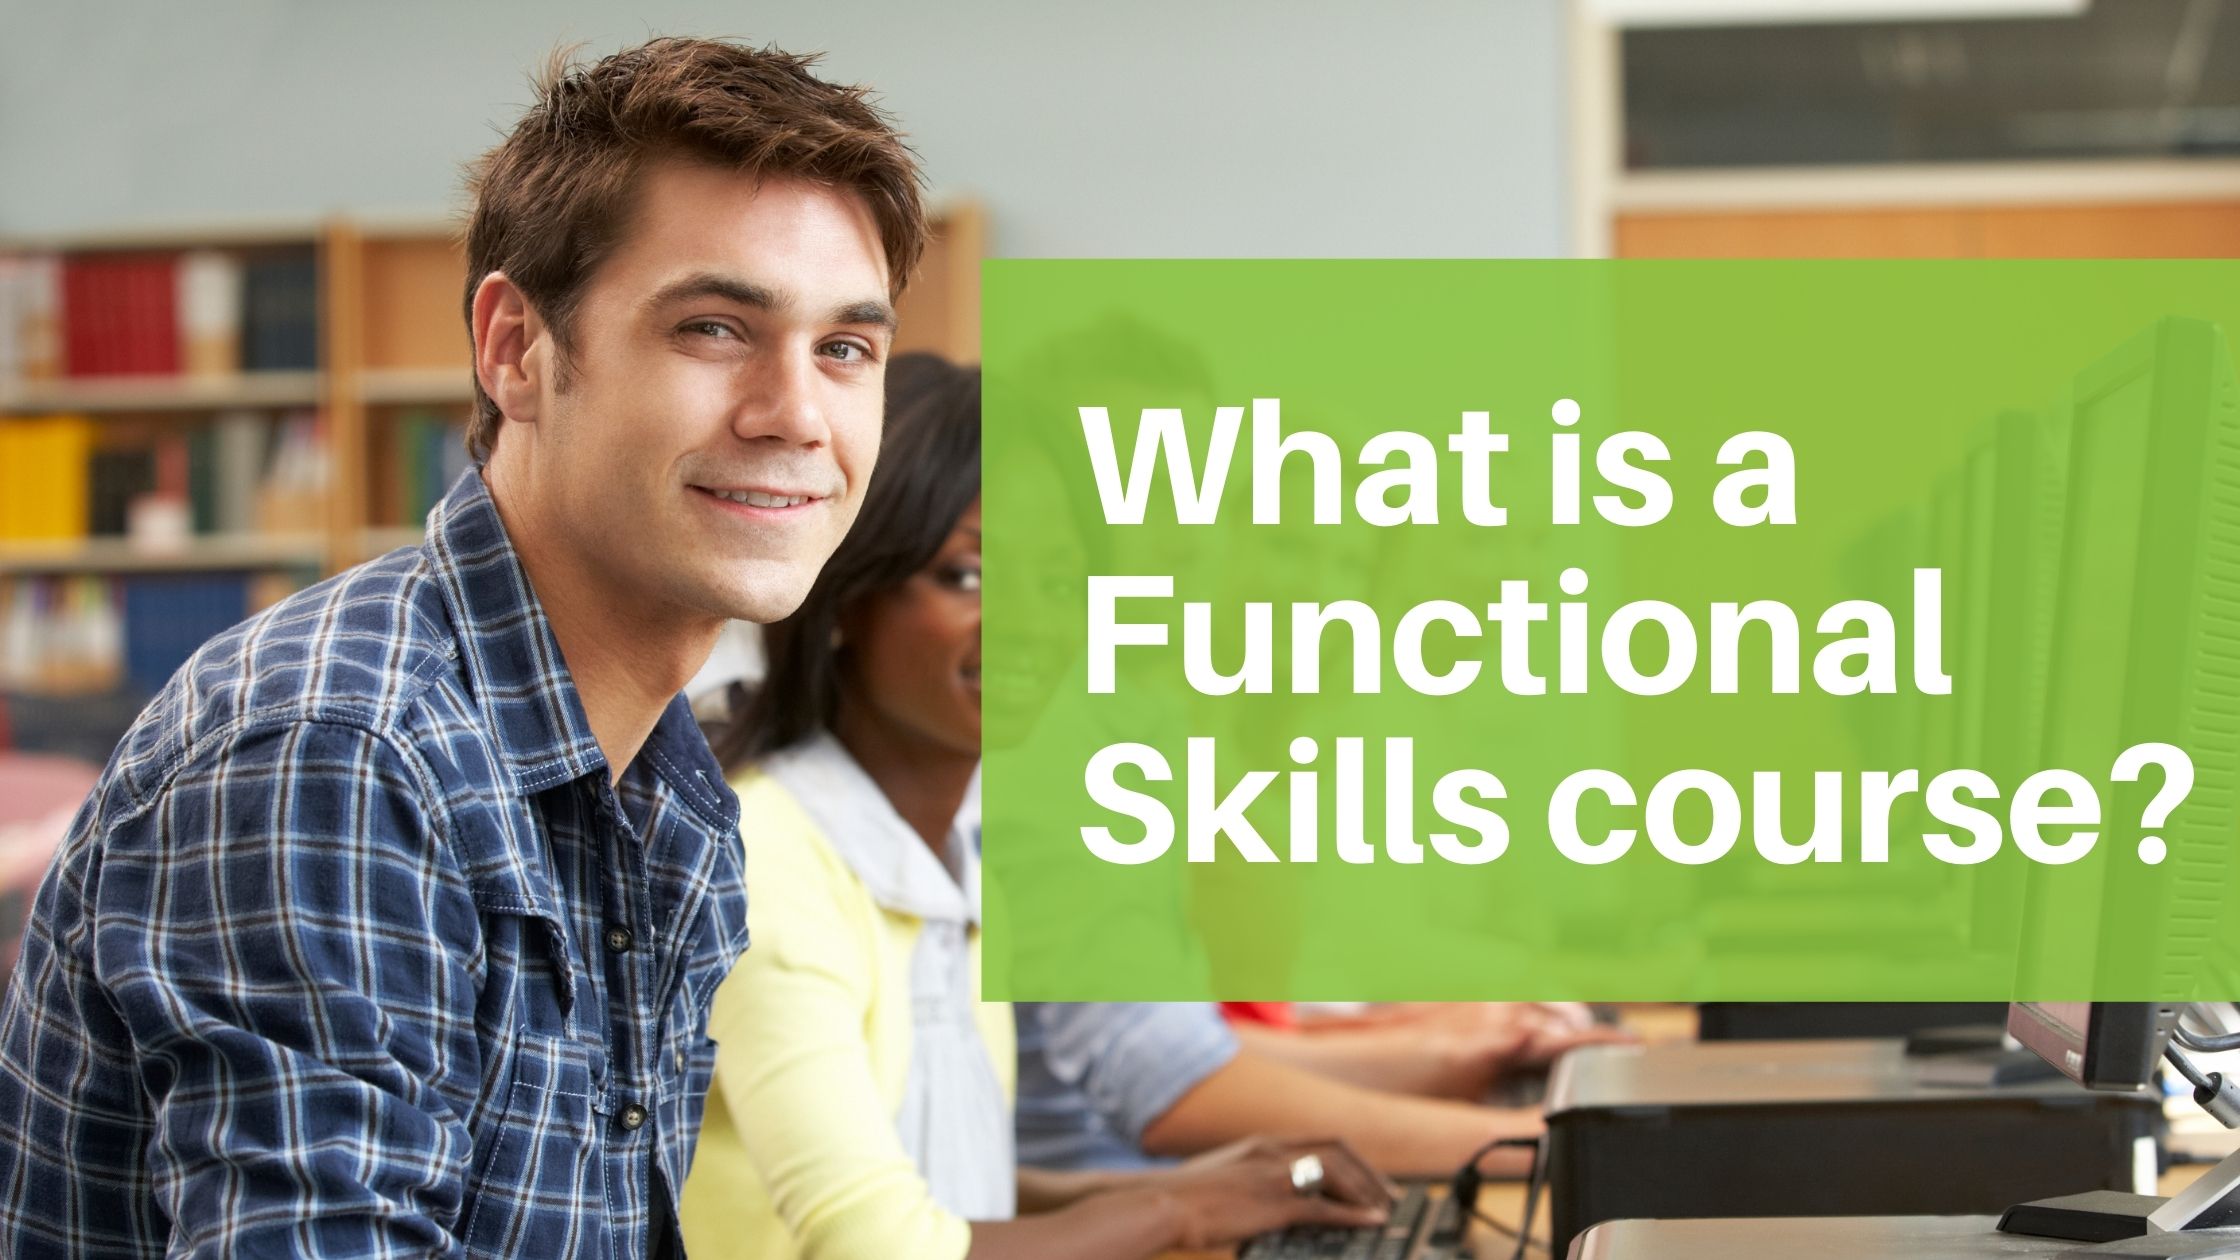 What is a Functional Skills Course?